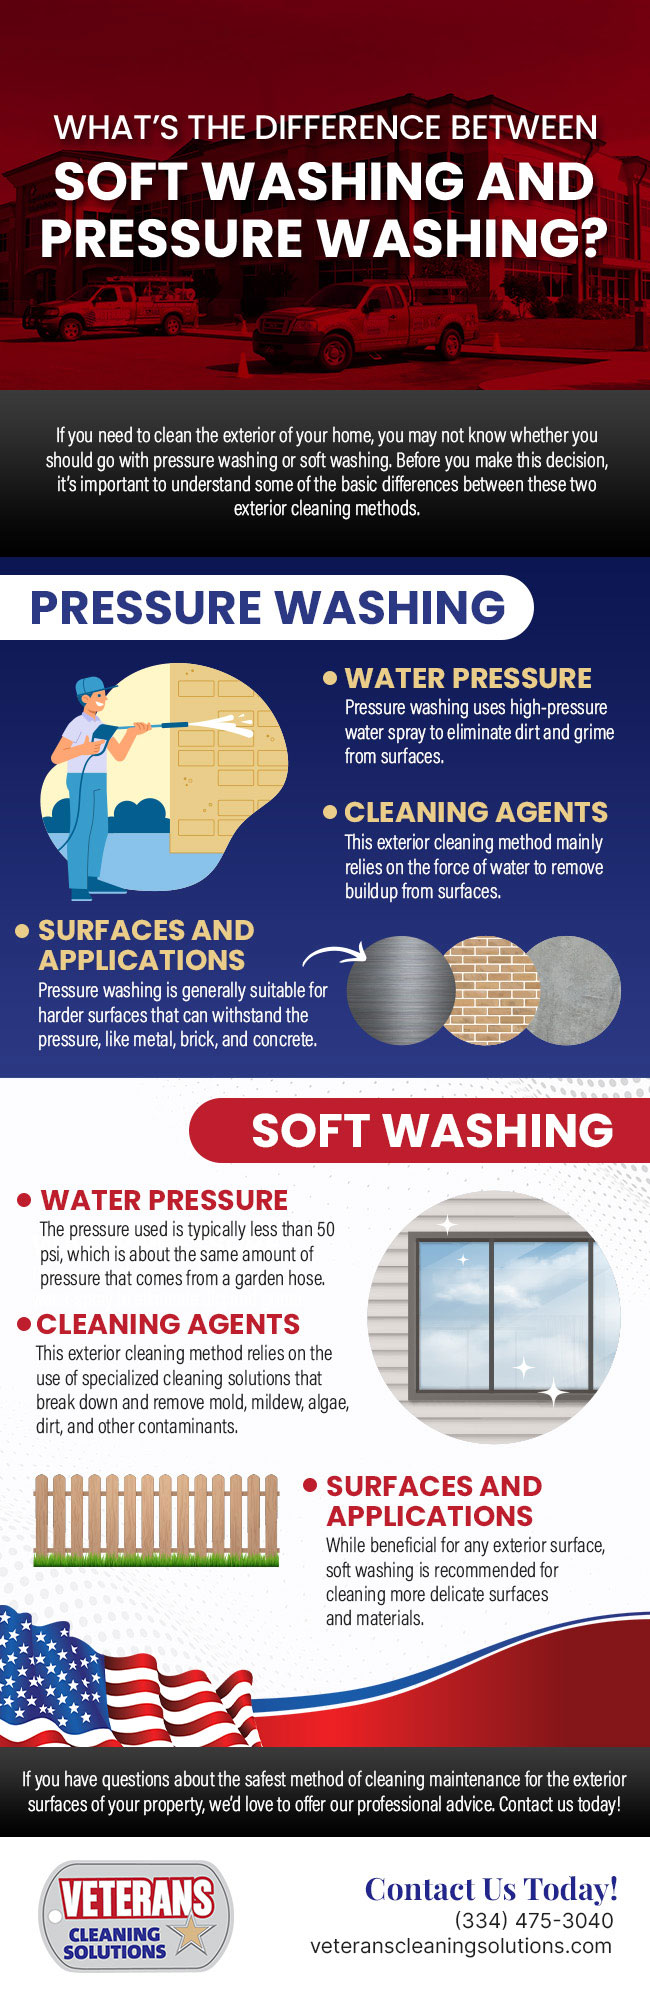 What’s the Difference Between Soft Washing and Pressure Washing?